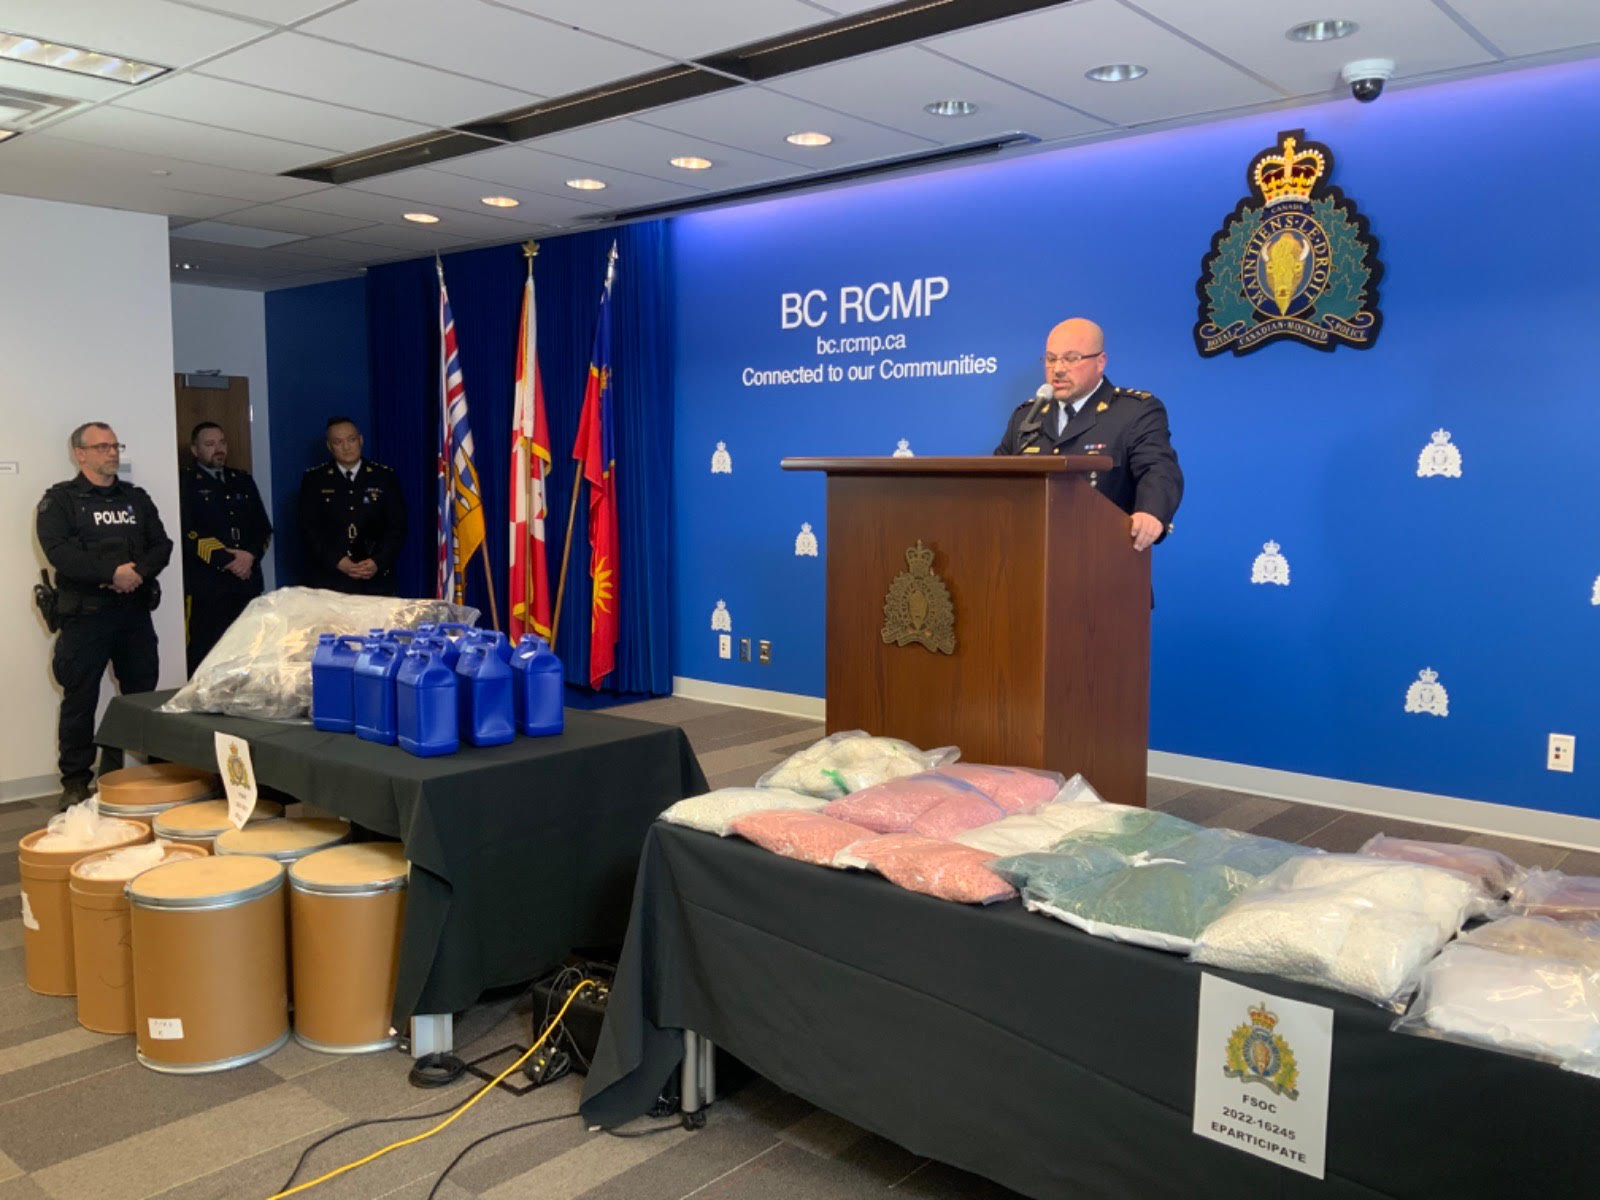 Chemicals capable of producing ‘262 millions of fentanyl doses’ seized, B.C. RCMP say